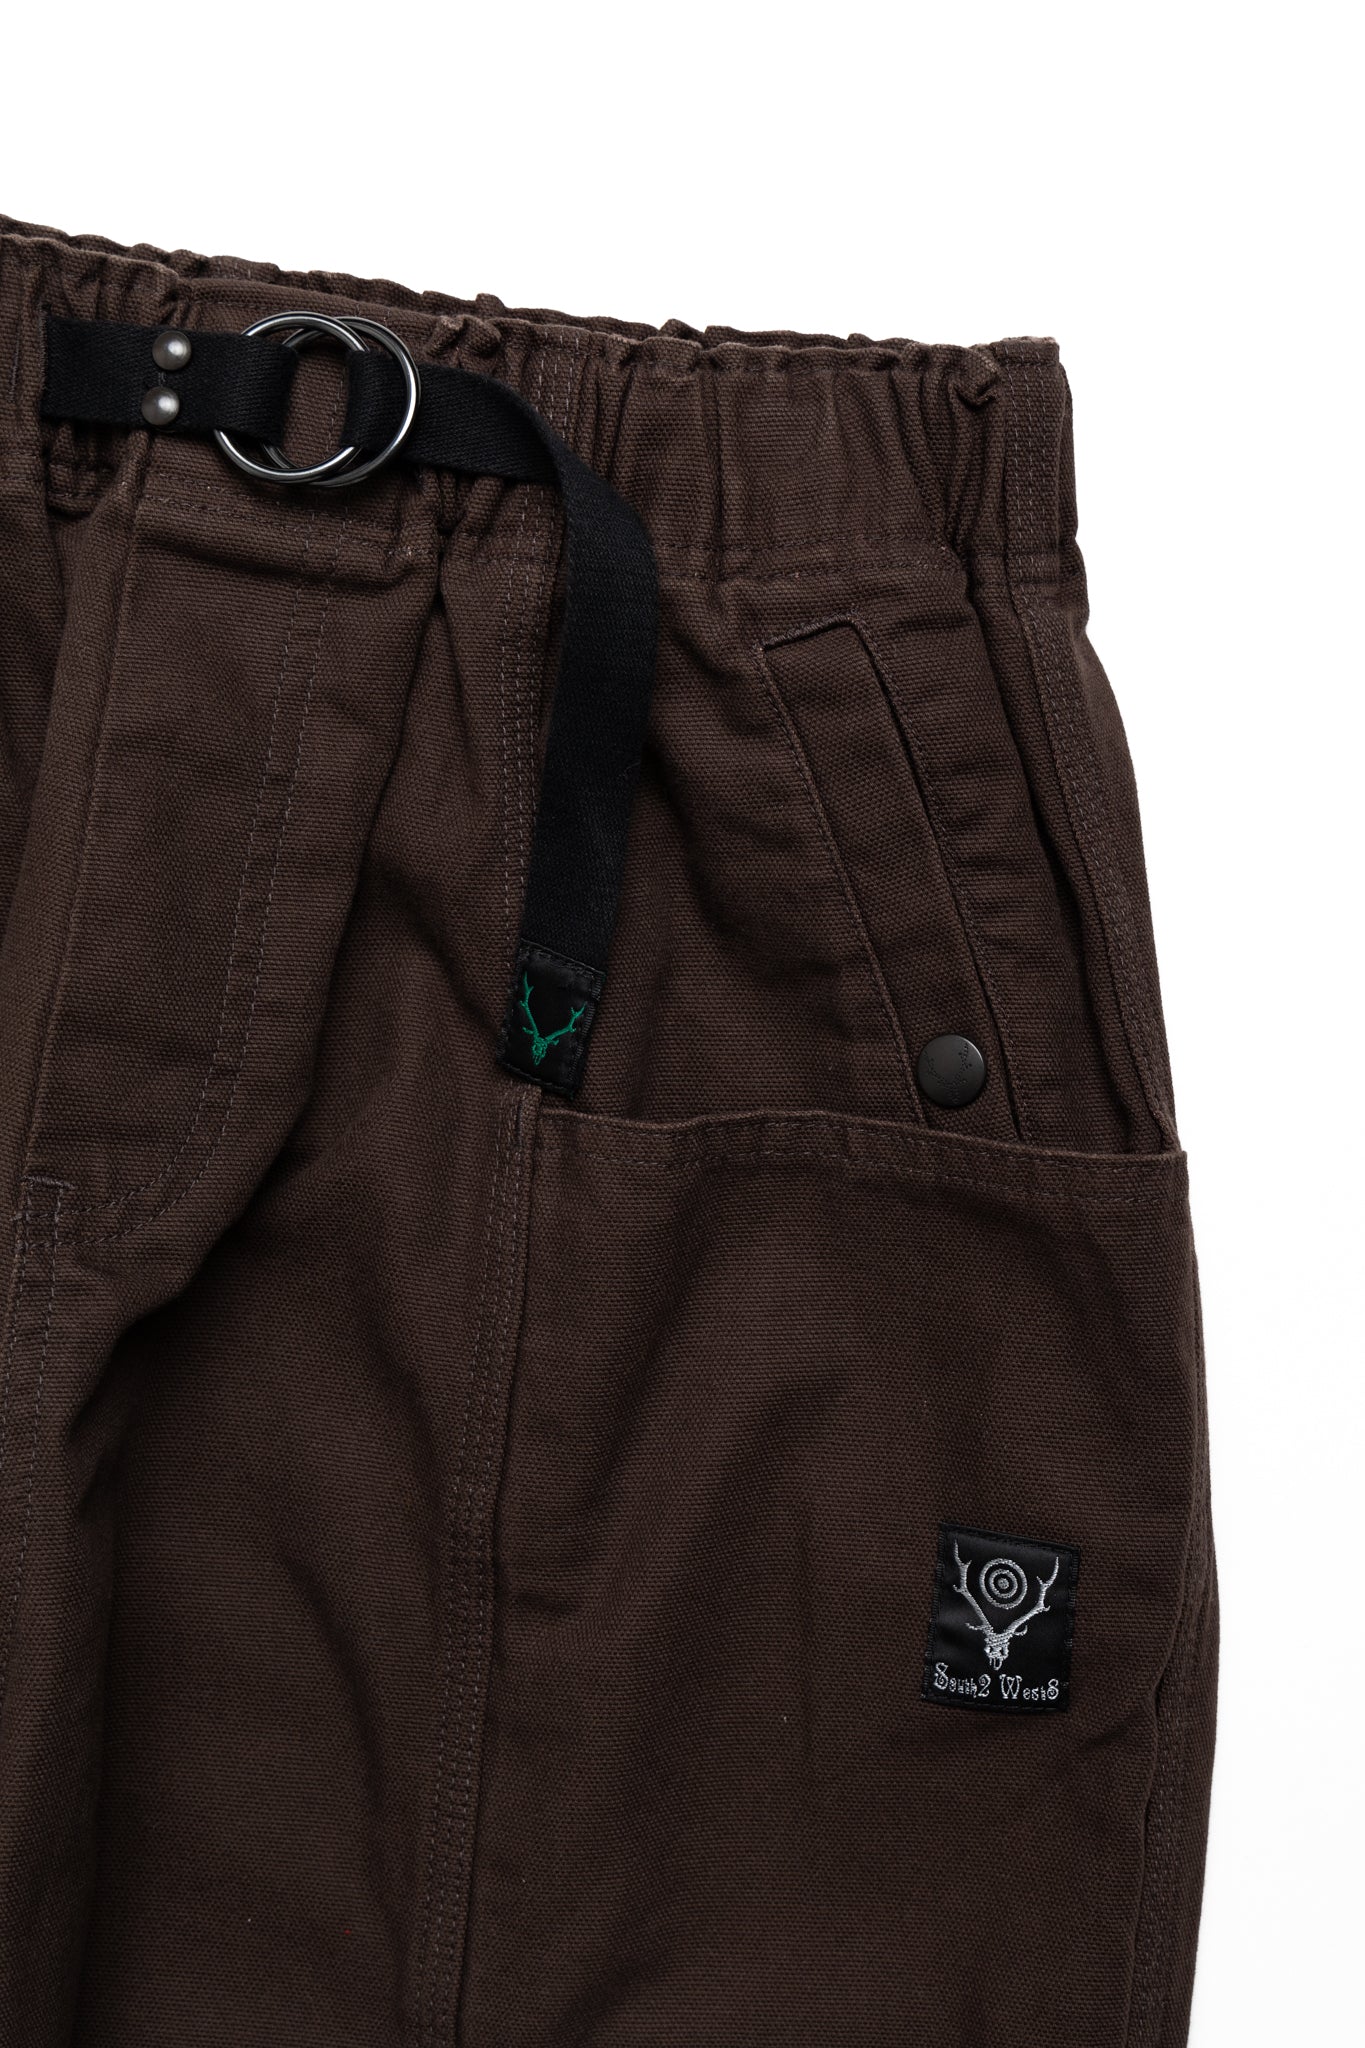 Belted C.S. Pant 11.5oz Cotton Canvas - Brown